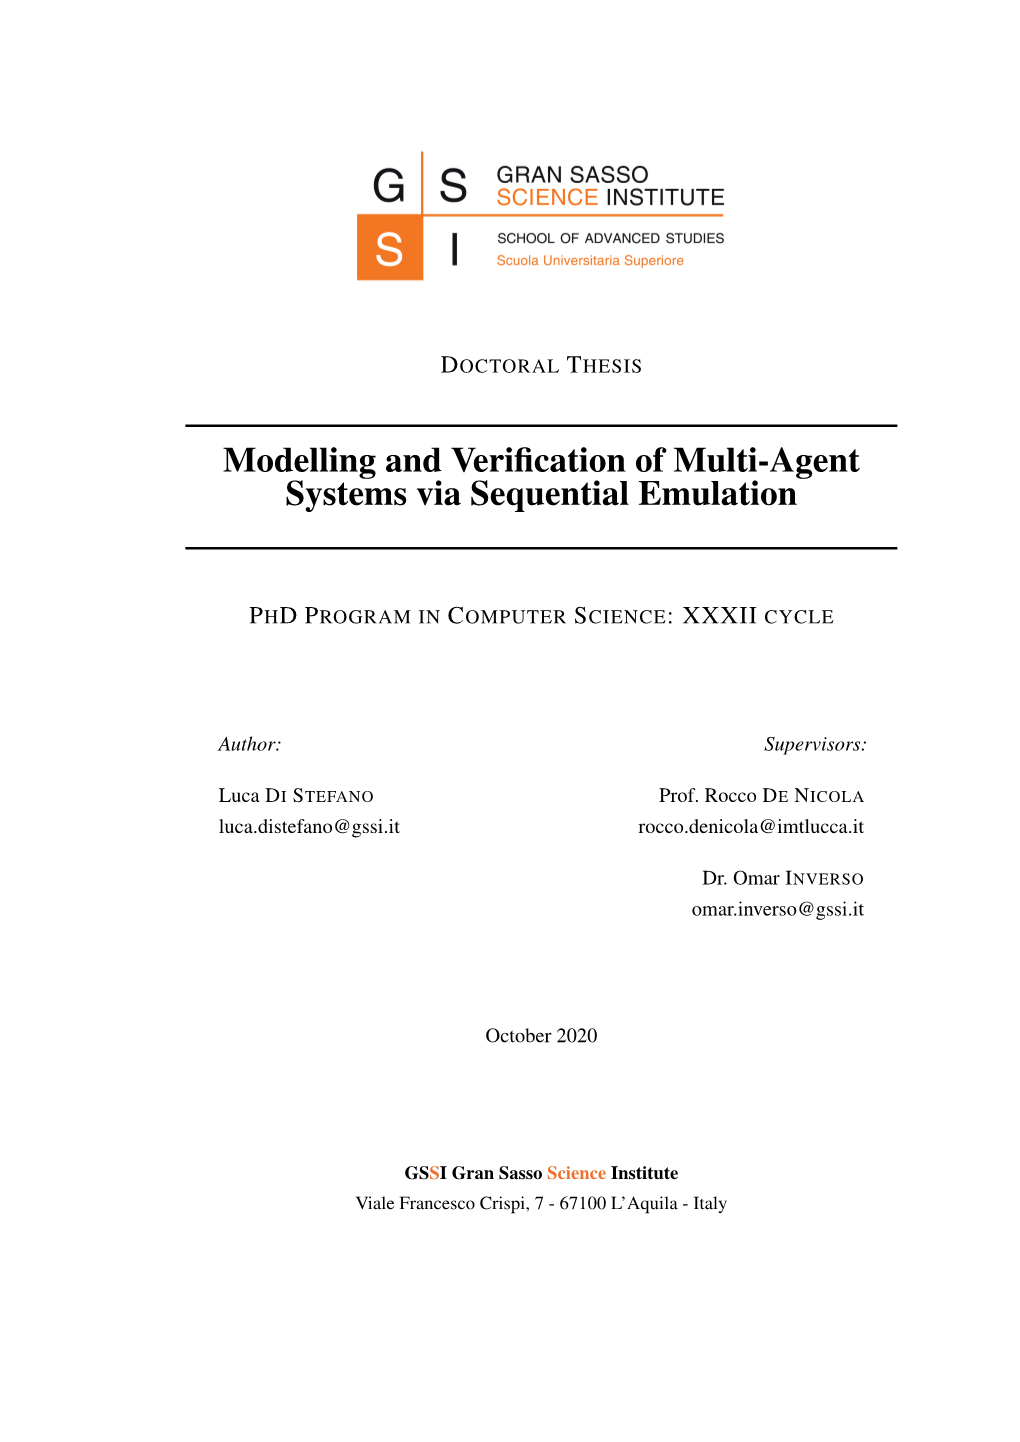 Modelling and Verification of Multi-Agent Systems Via